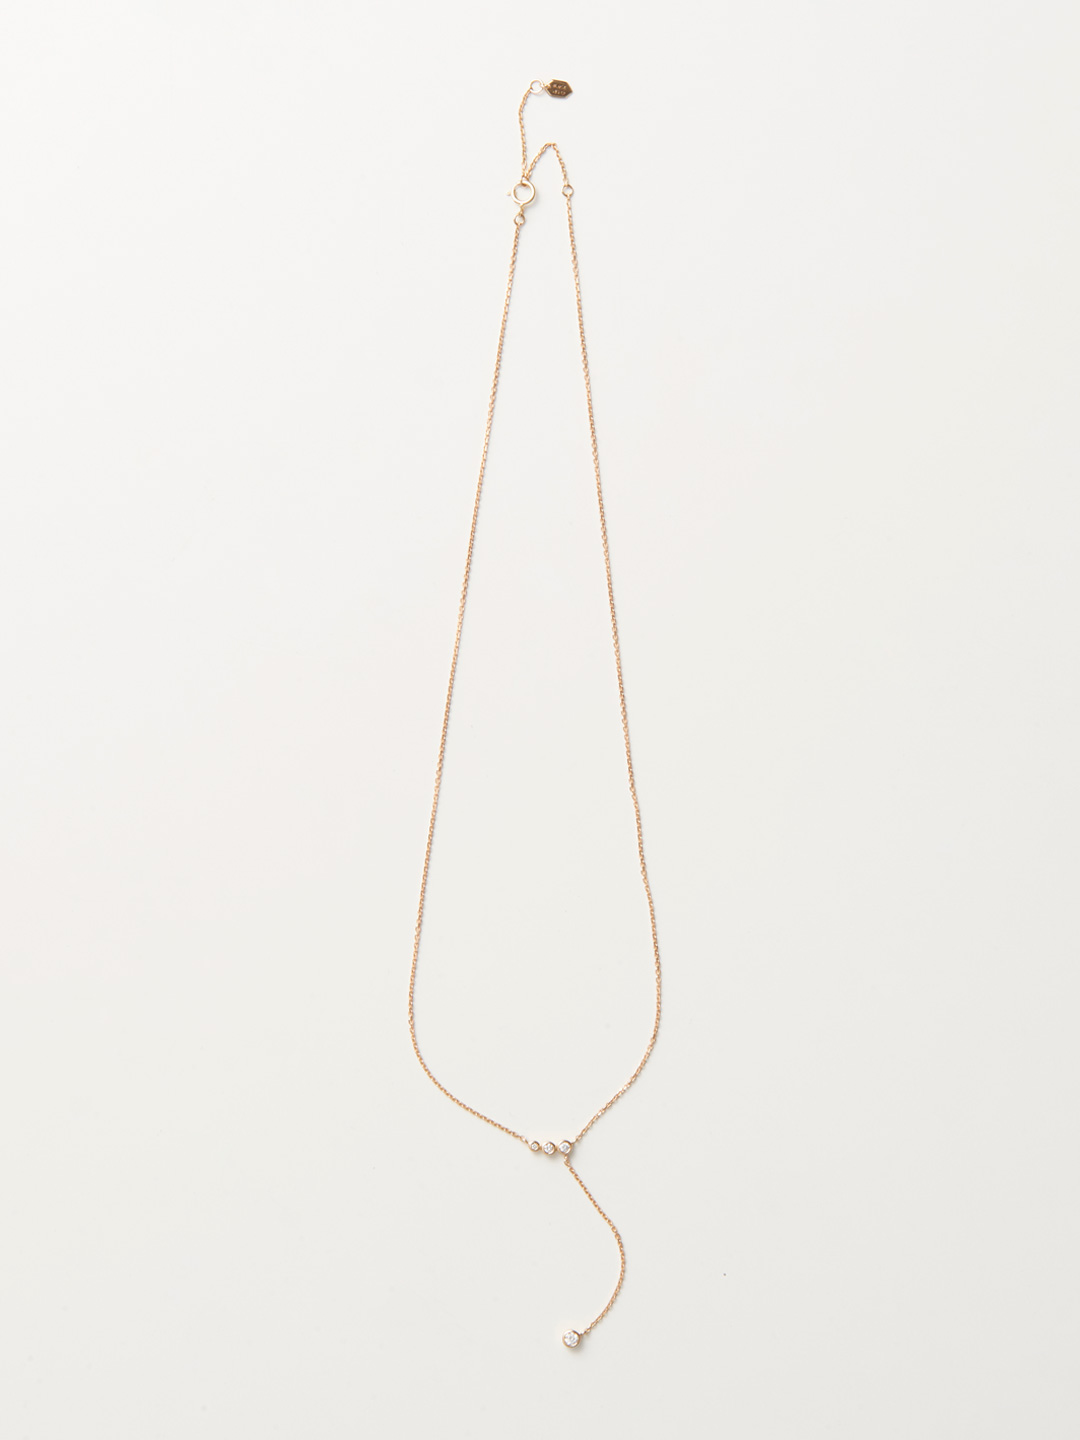 Grace Necklace YG14K - Yellow Gold